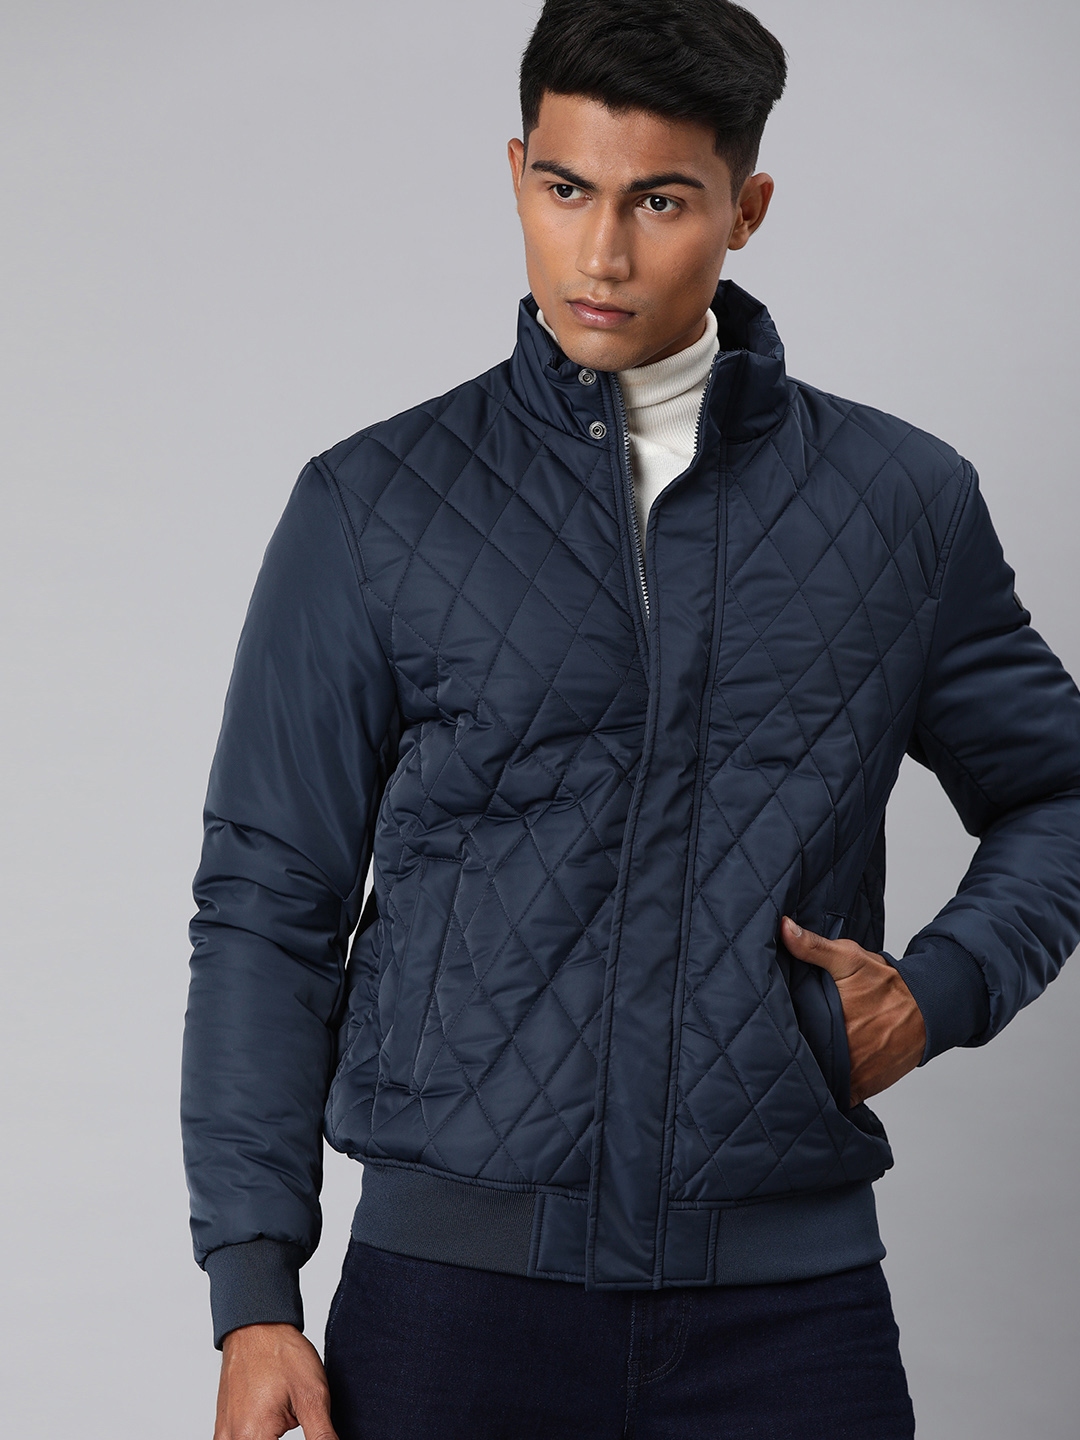 Buy U.S. Polo Assn. Men Navy Blue Solid Quilted Jacket - Jackets for ...